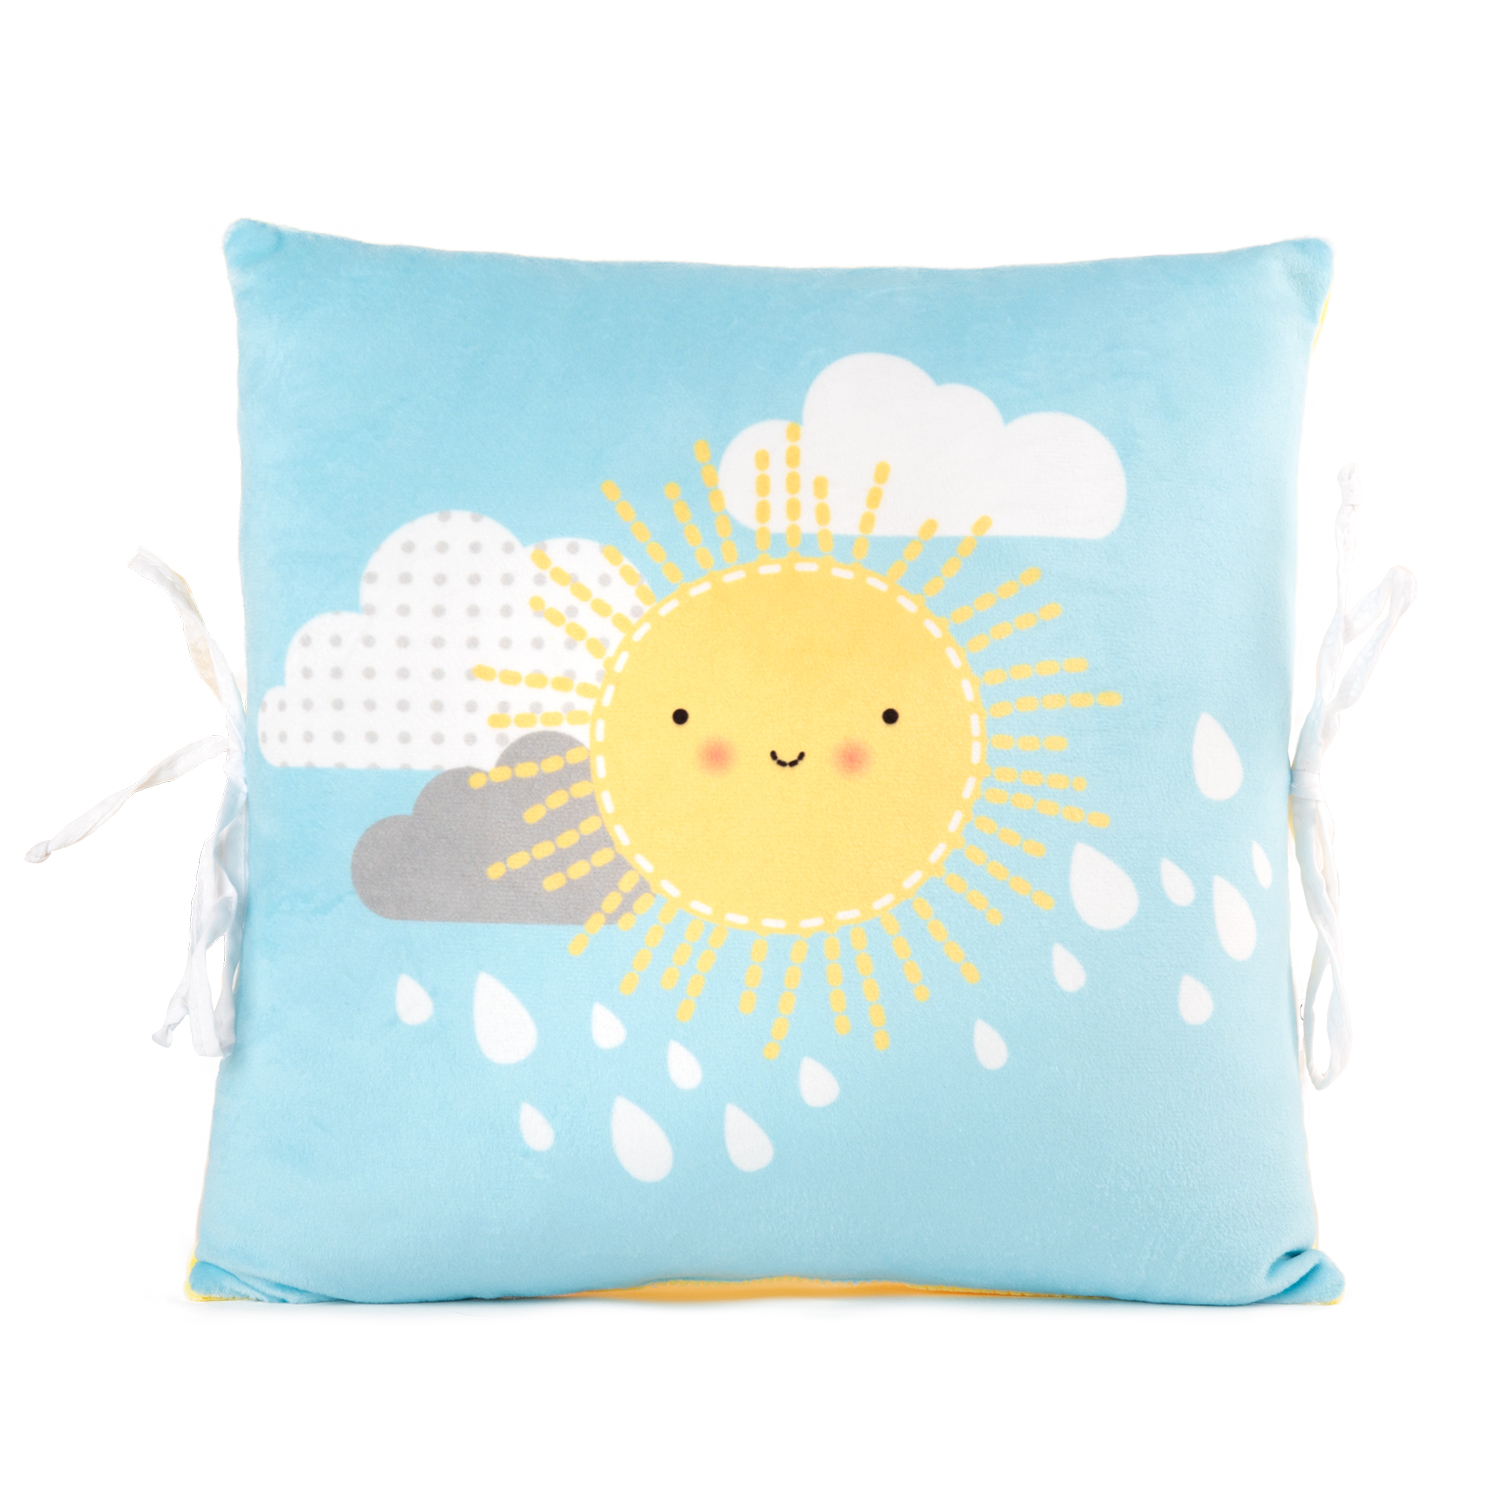 Set of 6 pillows for cot - Sky